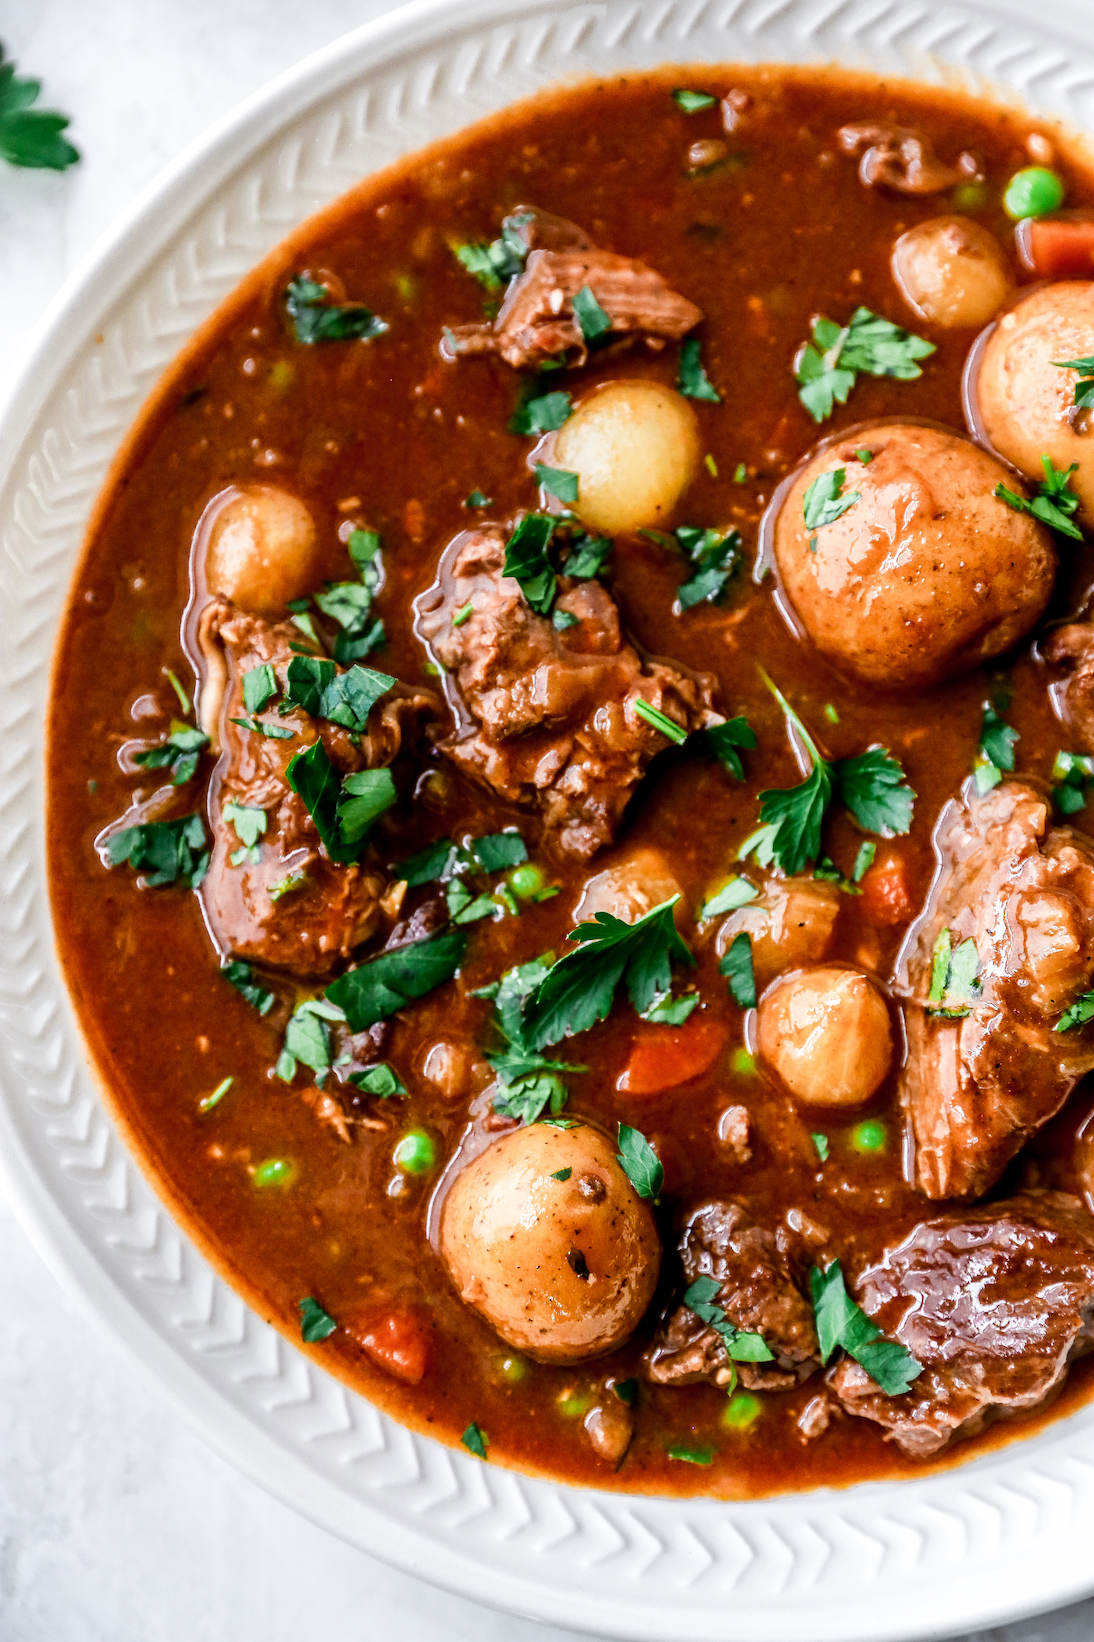 Irish Beef Stew with Stout-Cheddar Biscuits - Yes to Yolks